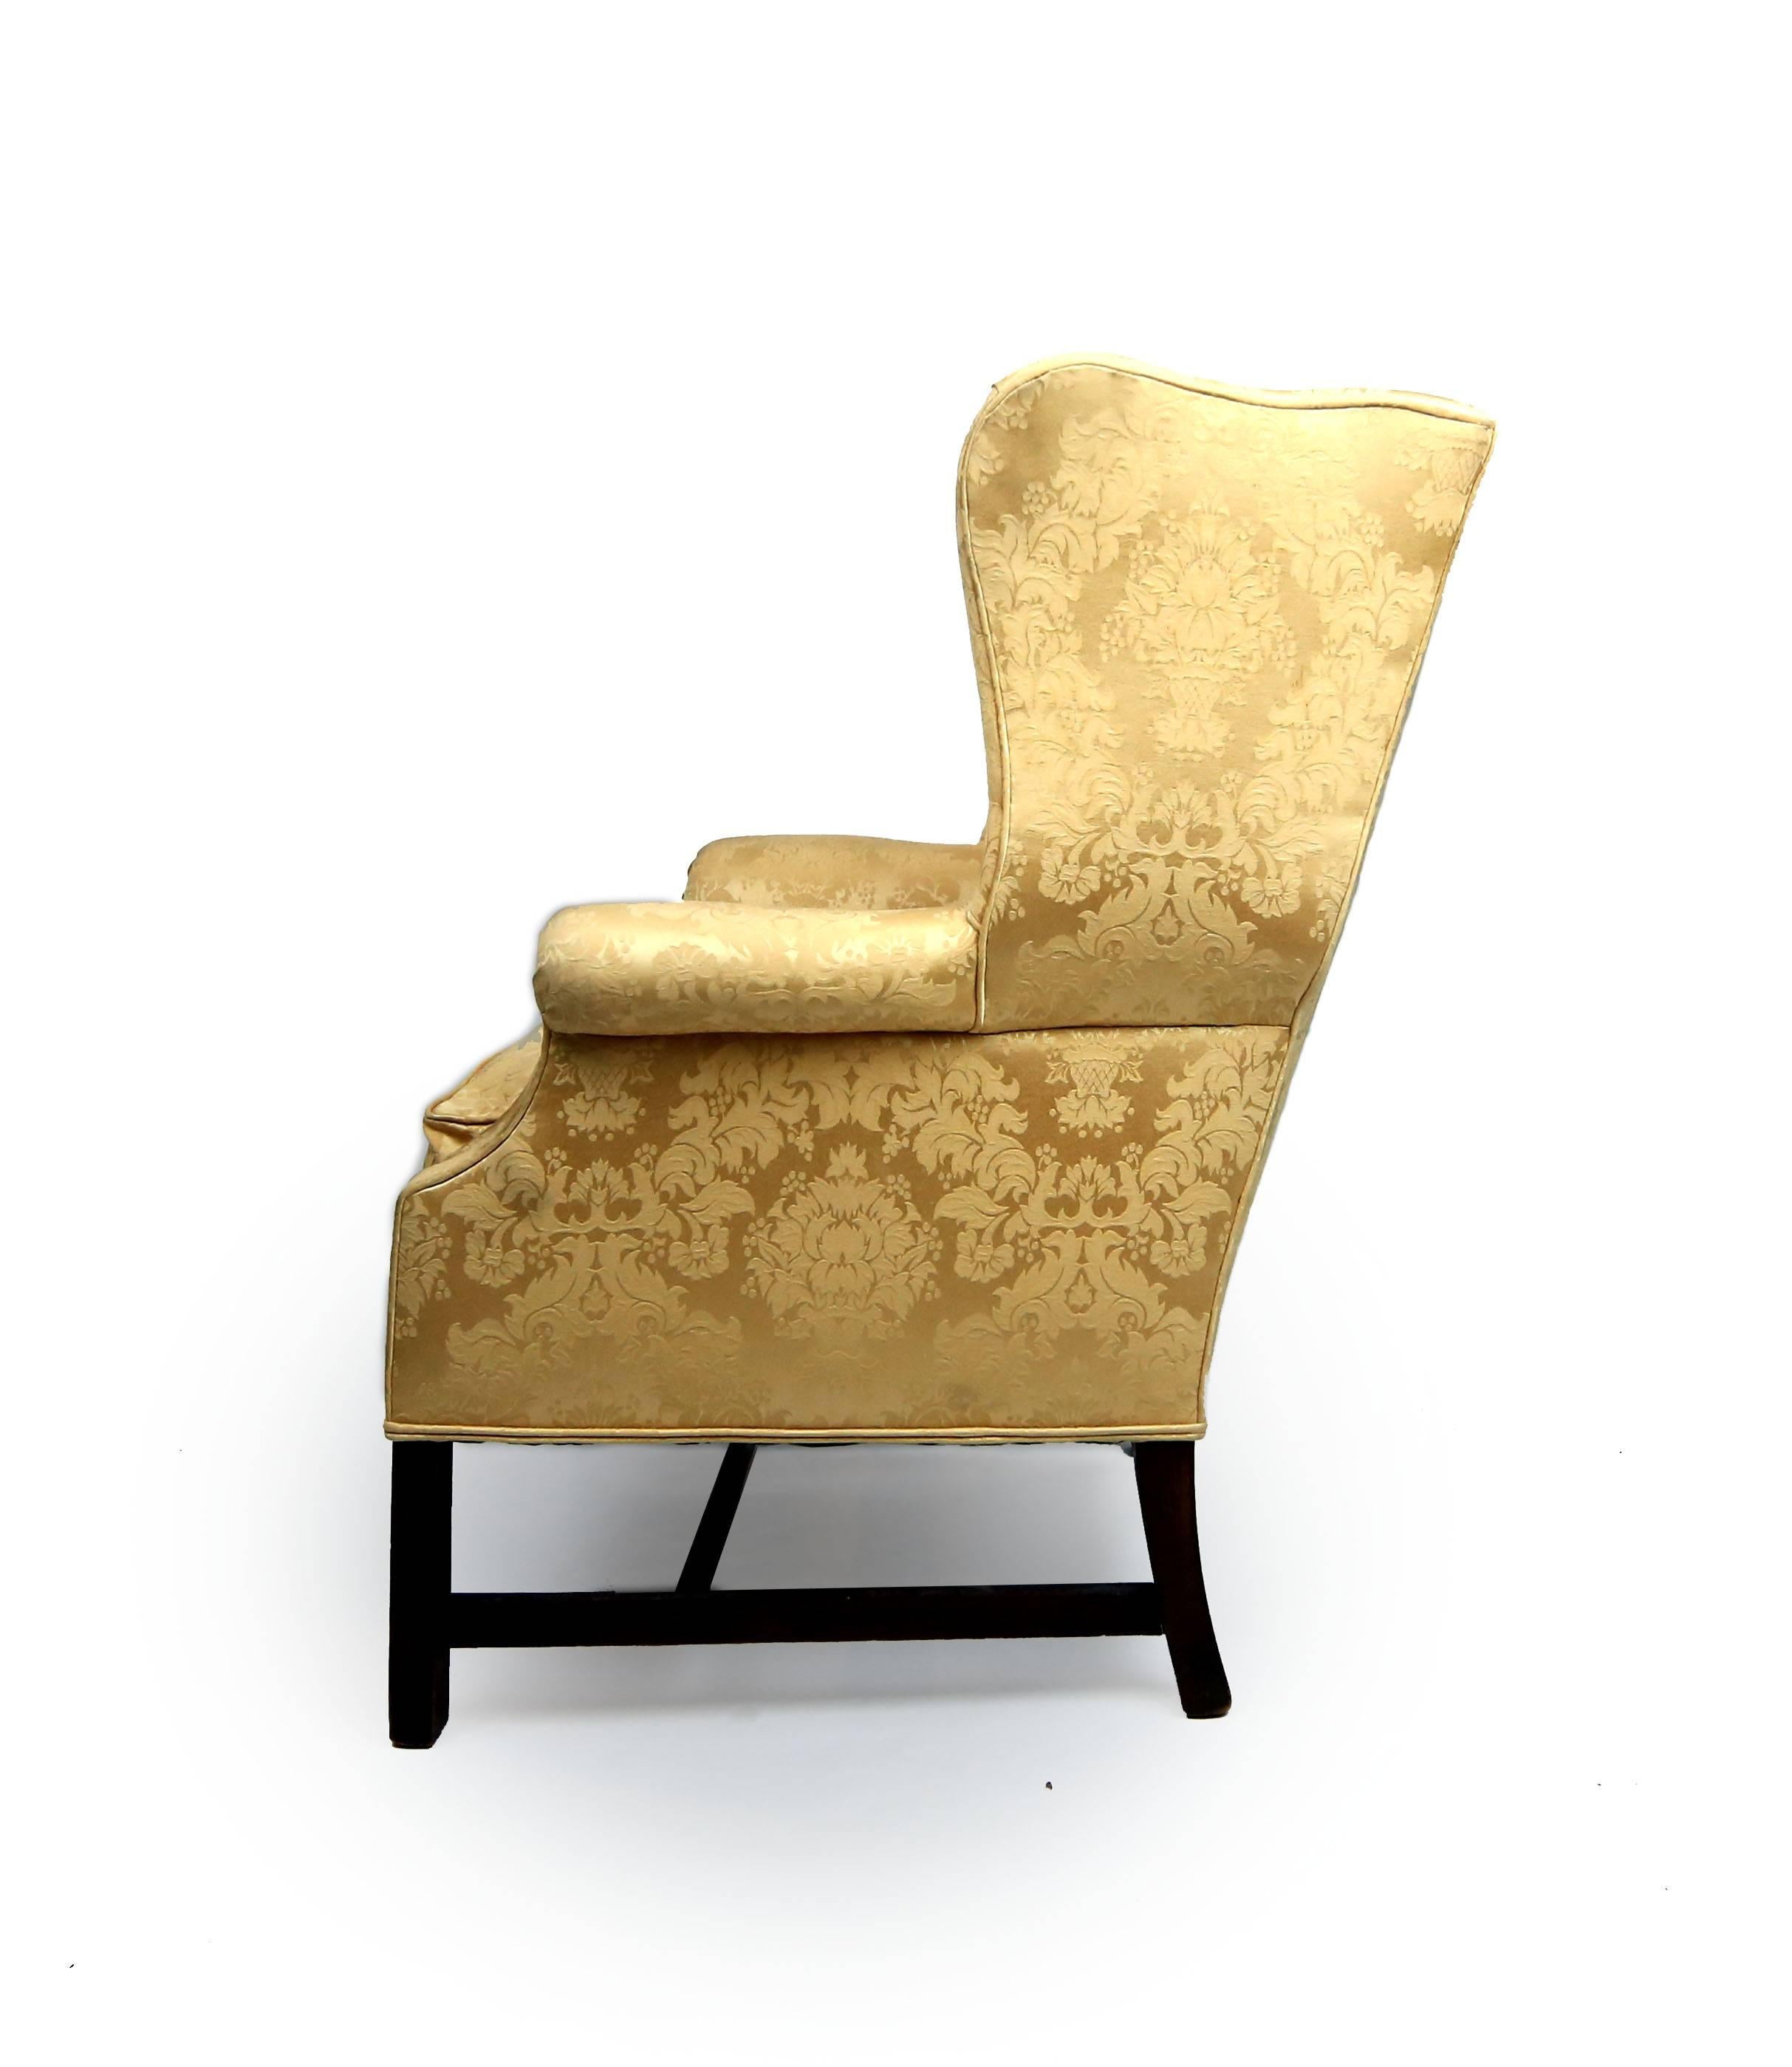 Well proportioned armchair with pleasing and curves supported by square molded legs. Feather cushioned seat and upholstered in gold damask.